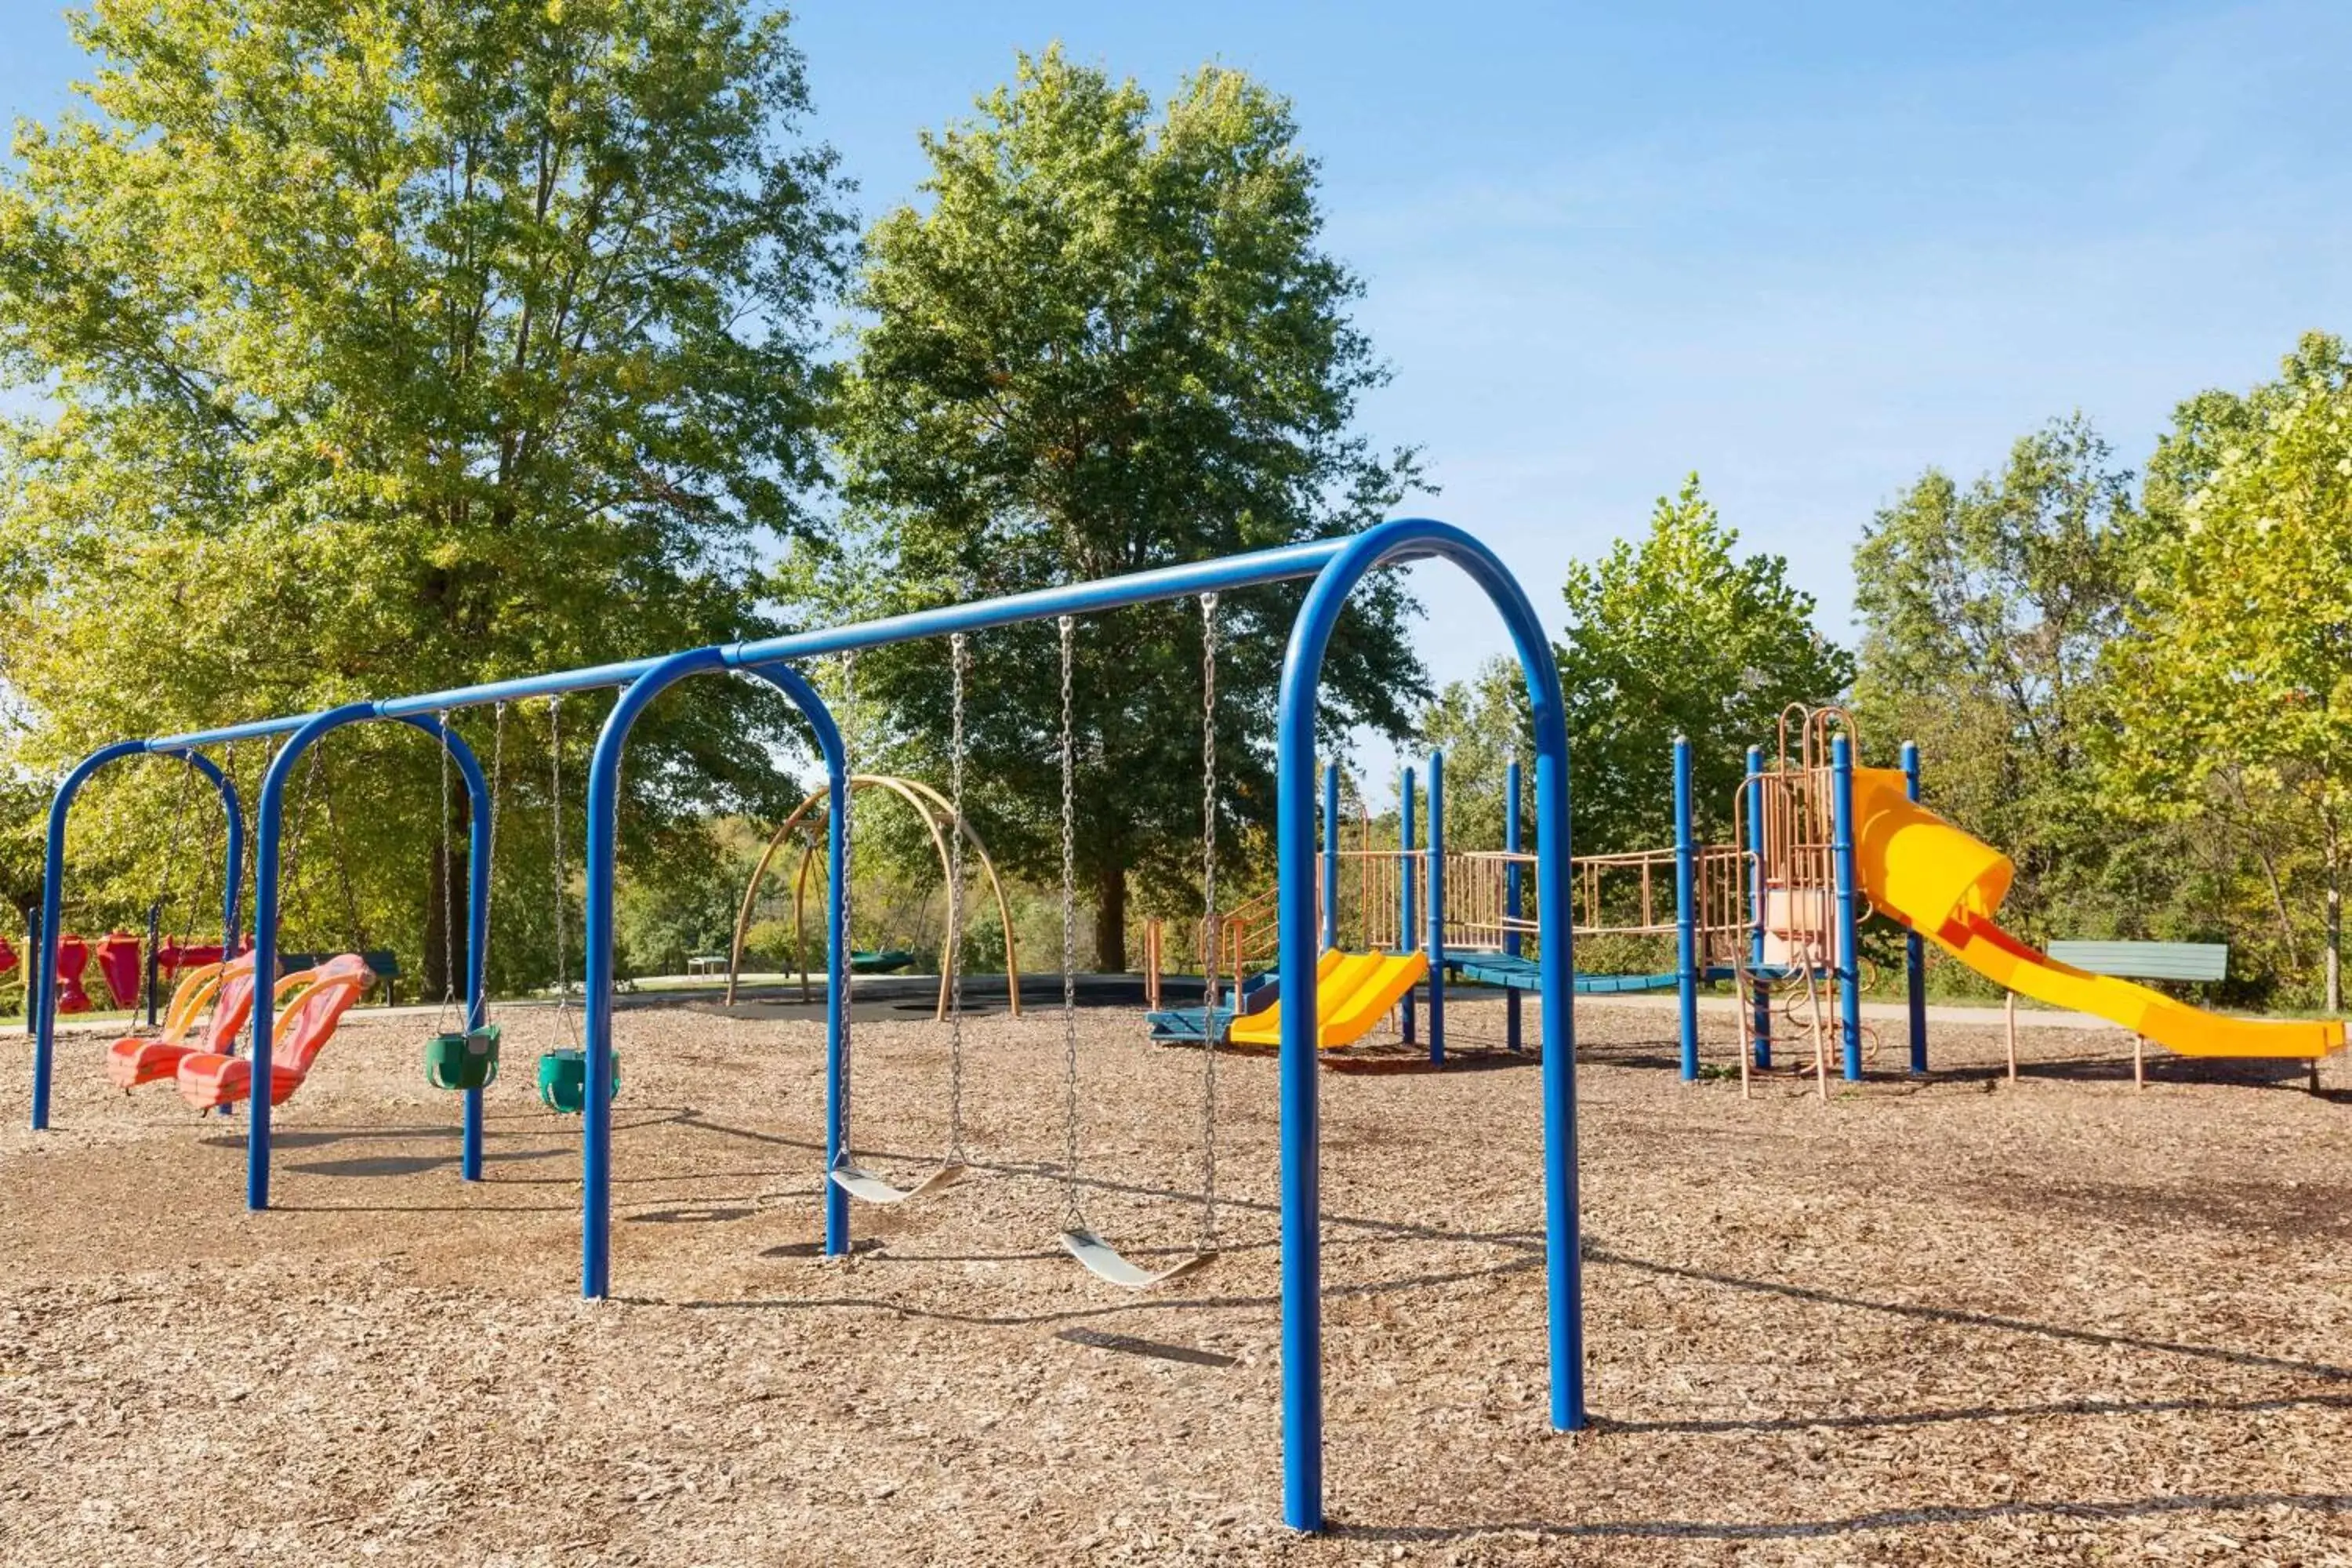 Off site, Children's Play Area in Super 8 by Wyndham Hannibal